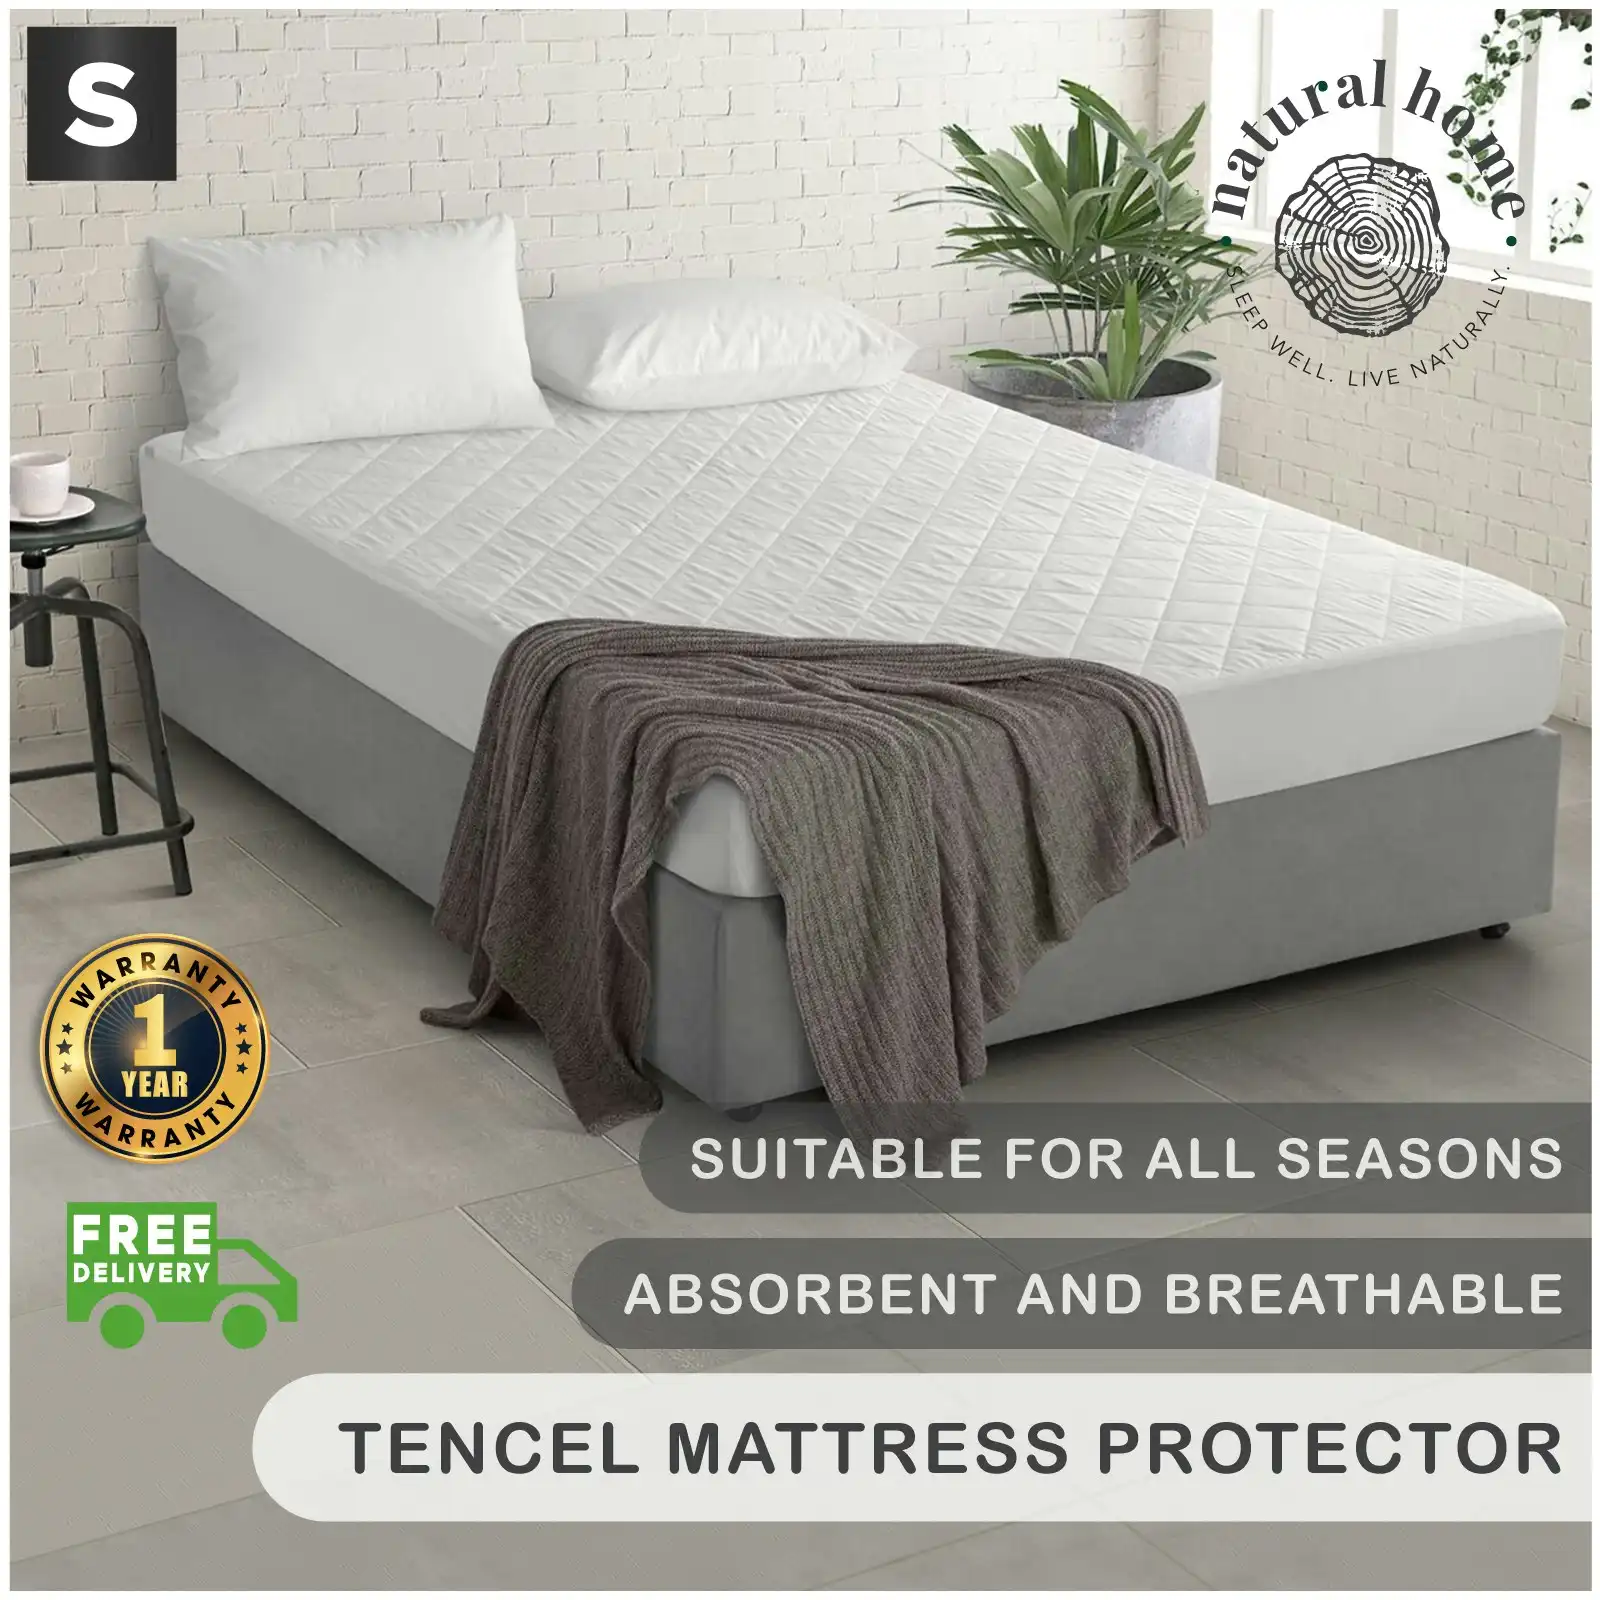 Natural Home Tencel Quilted Mattress Protector White Single Bed